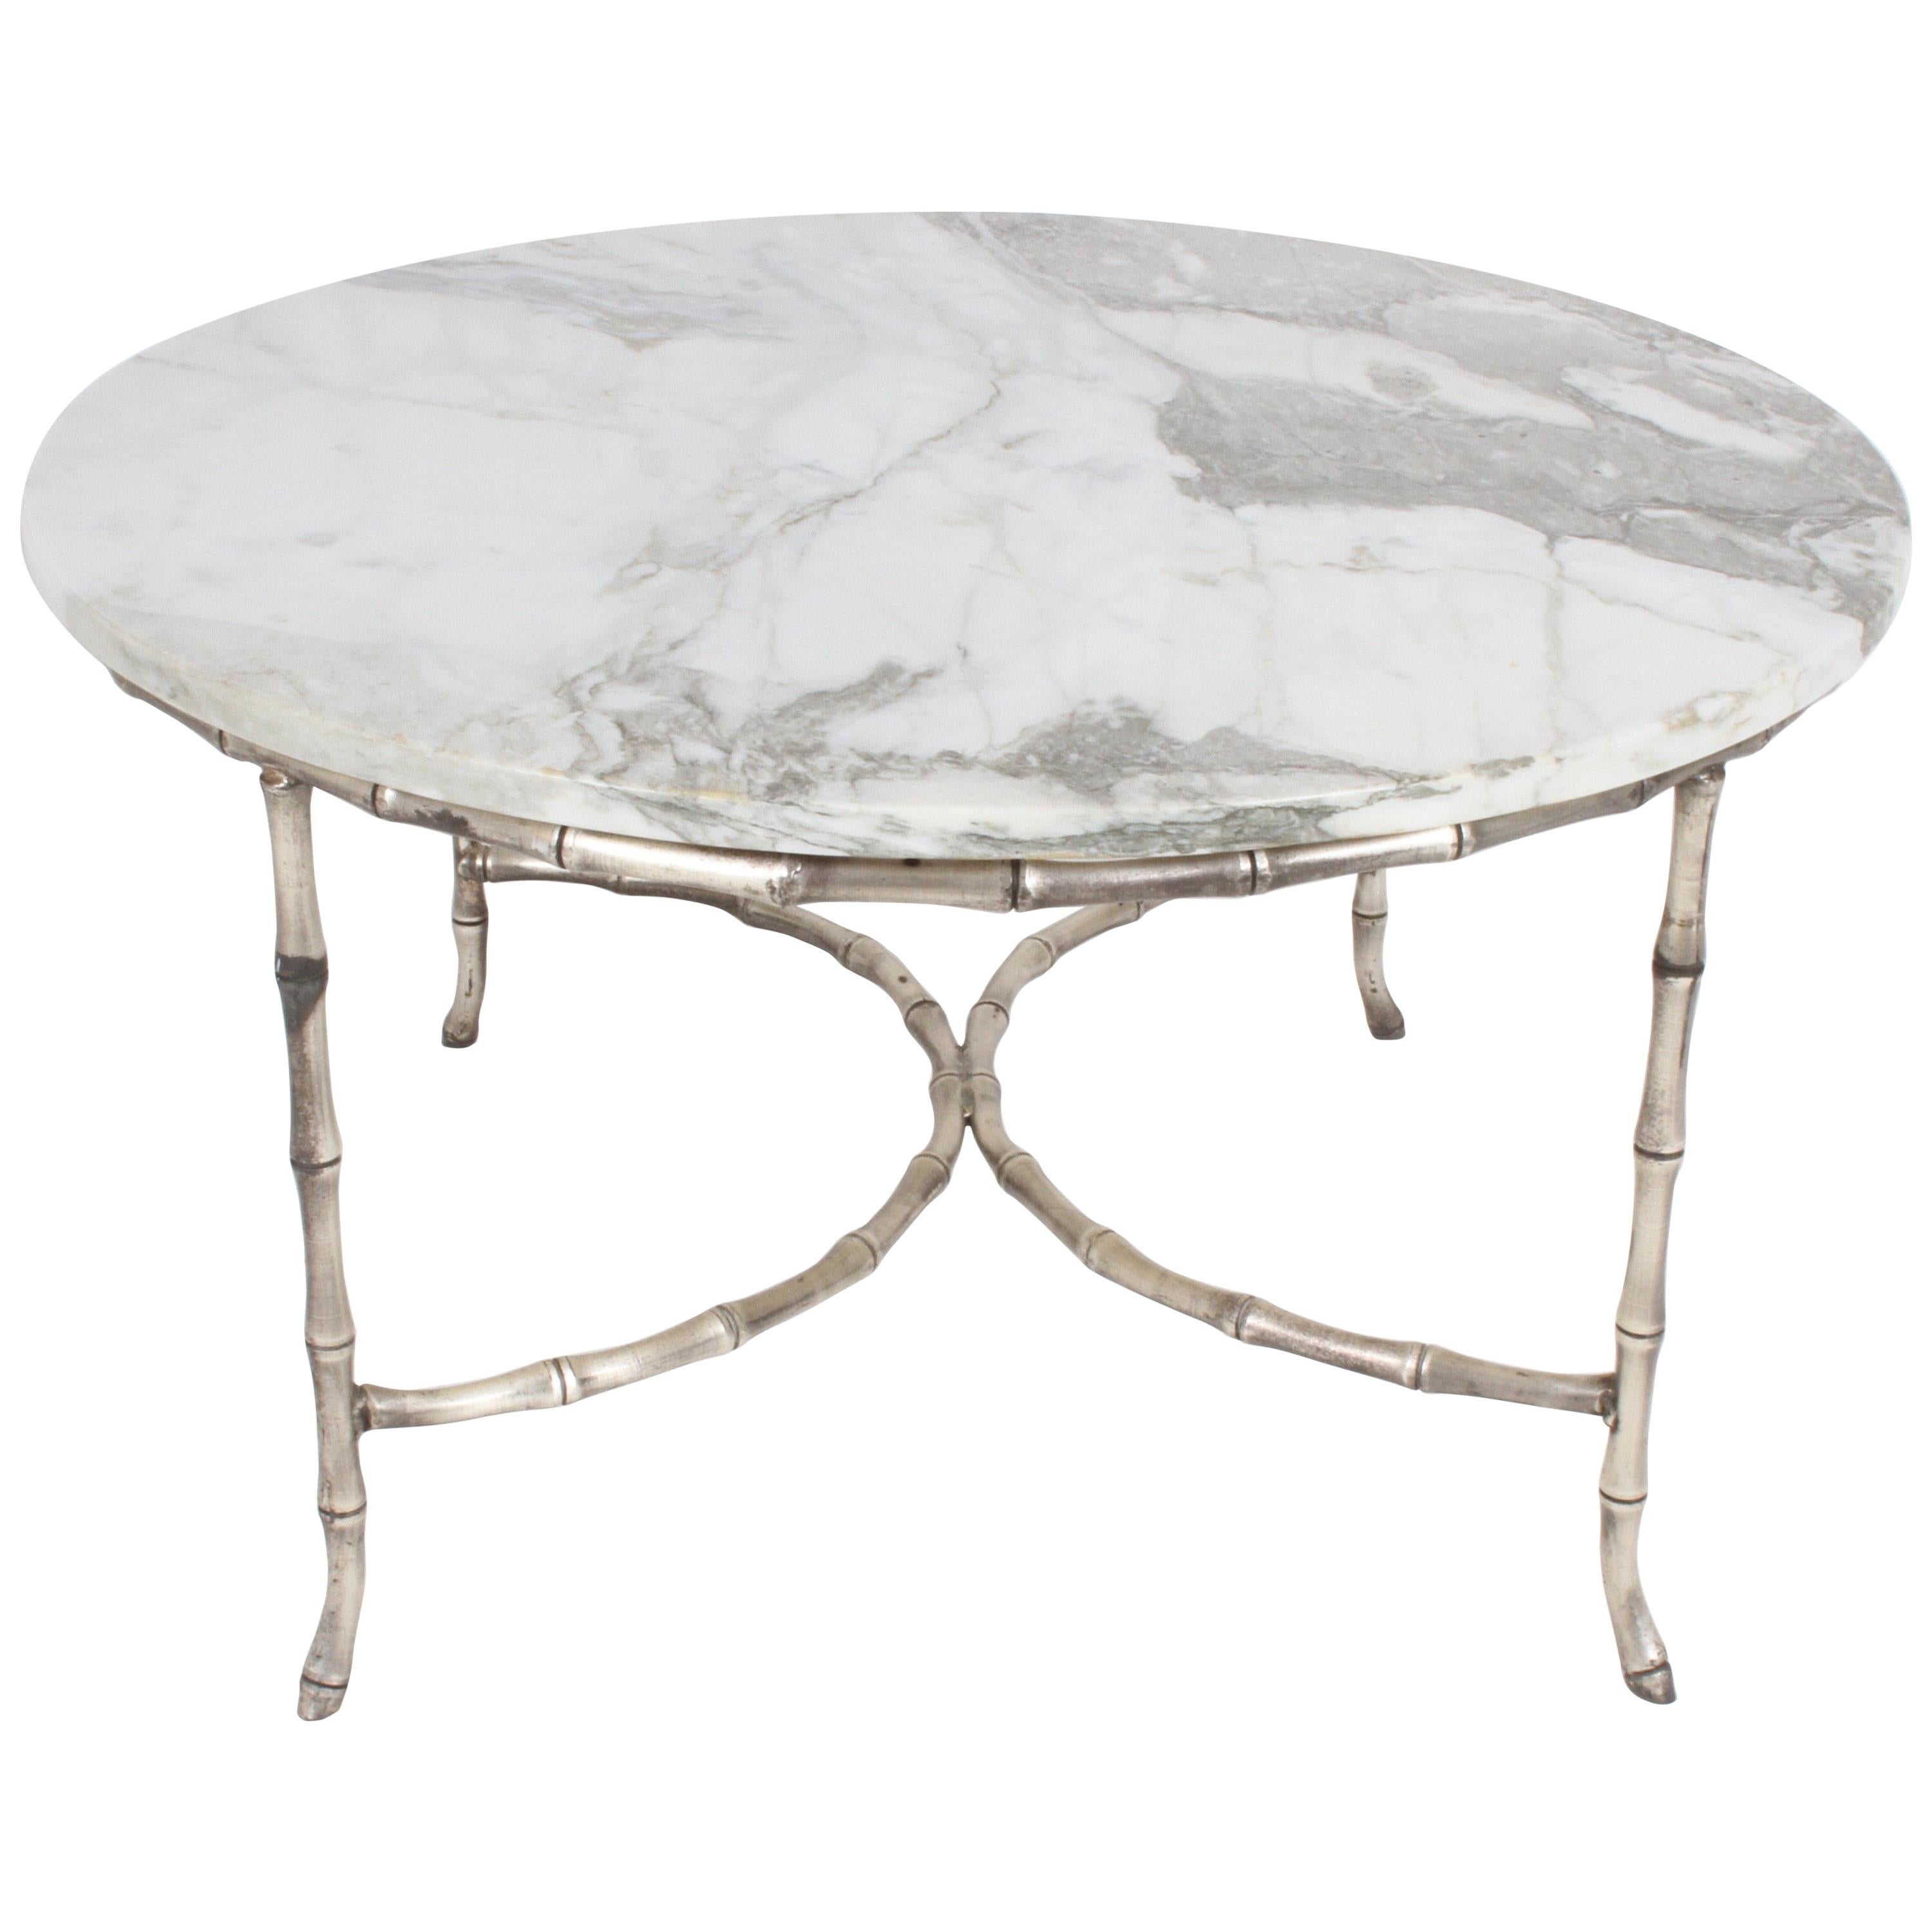 Italian Silver Plated Faux Bamboo Marble Top Coffee or Side Table For Sale